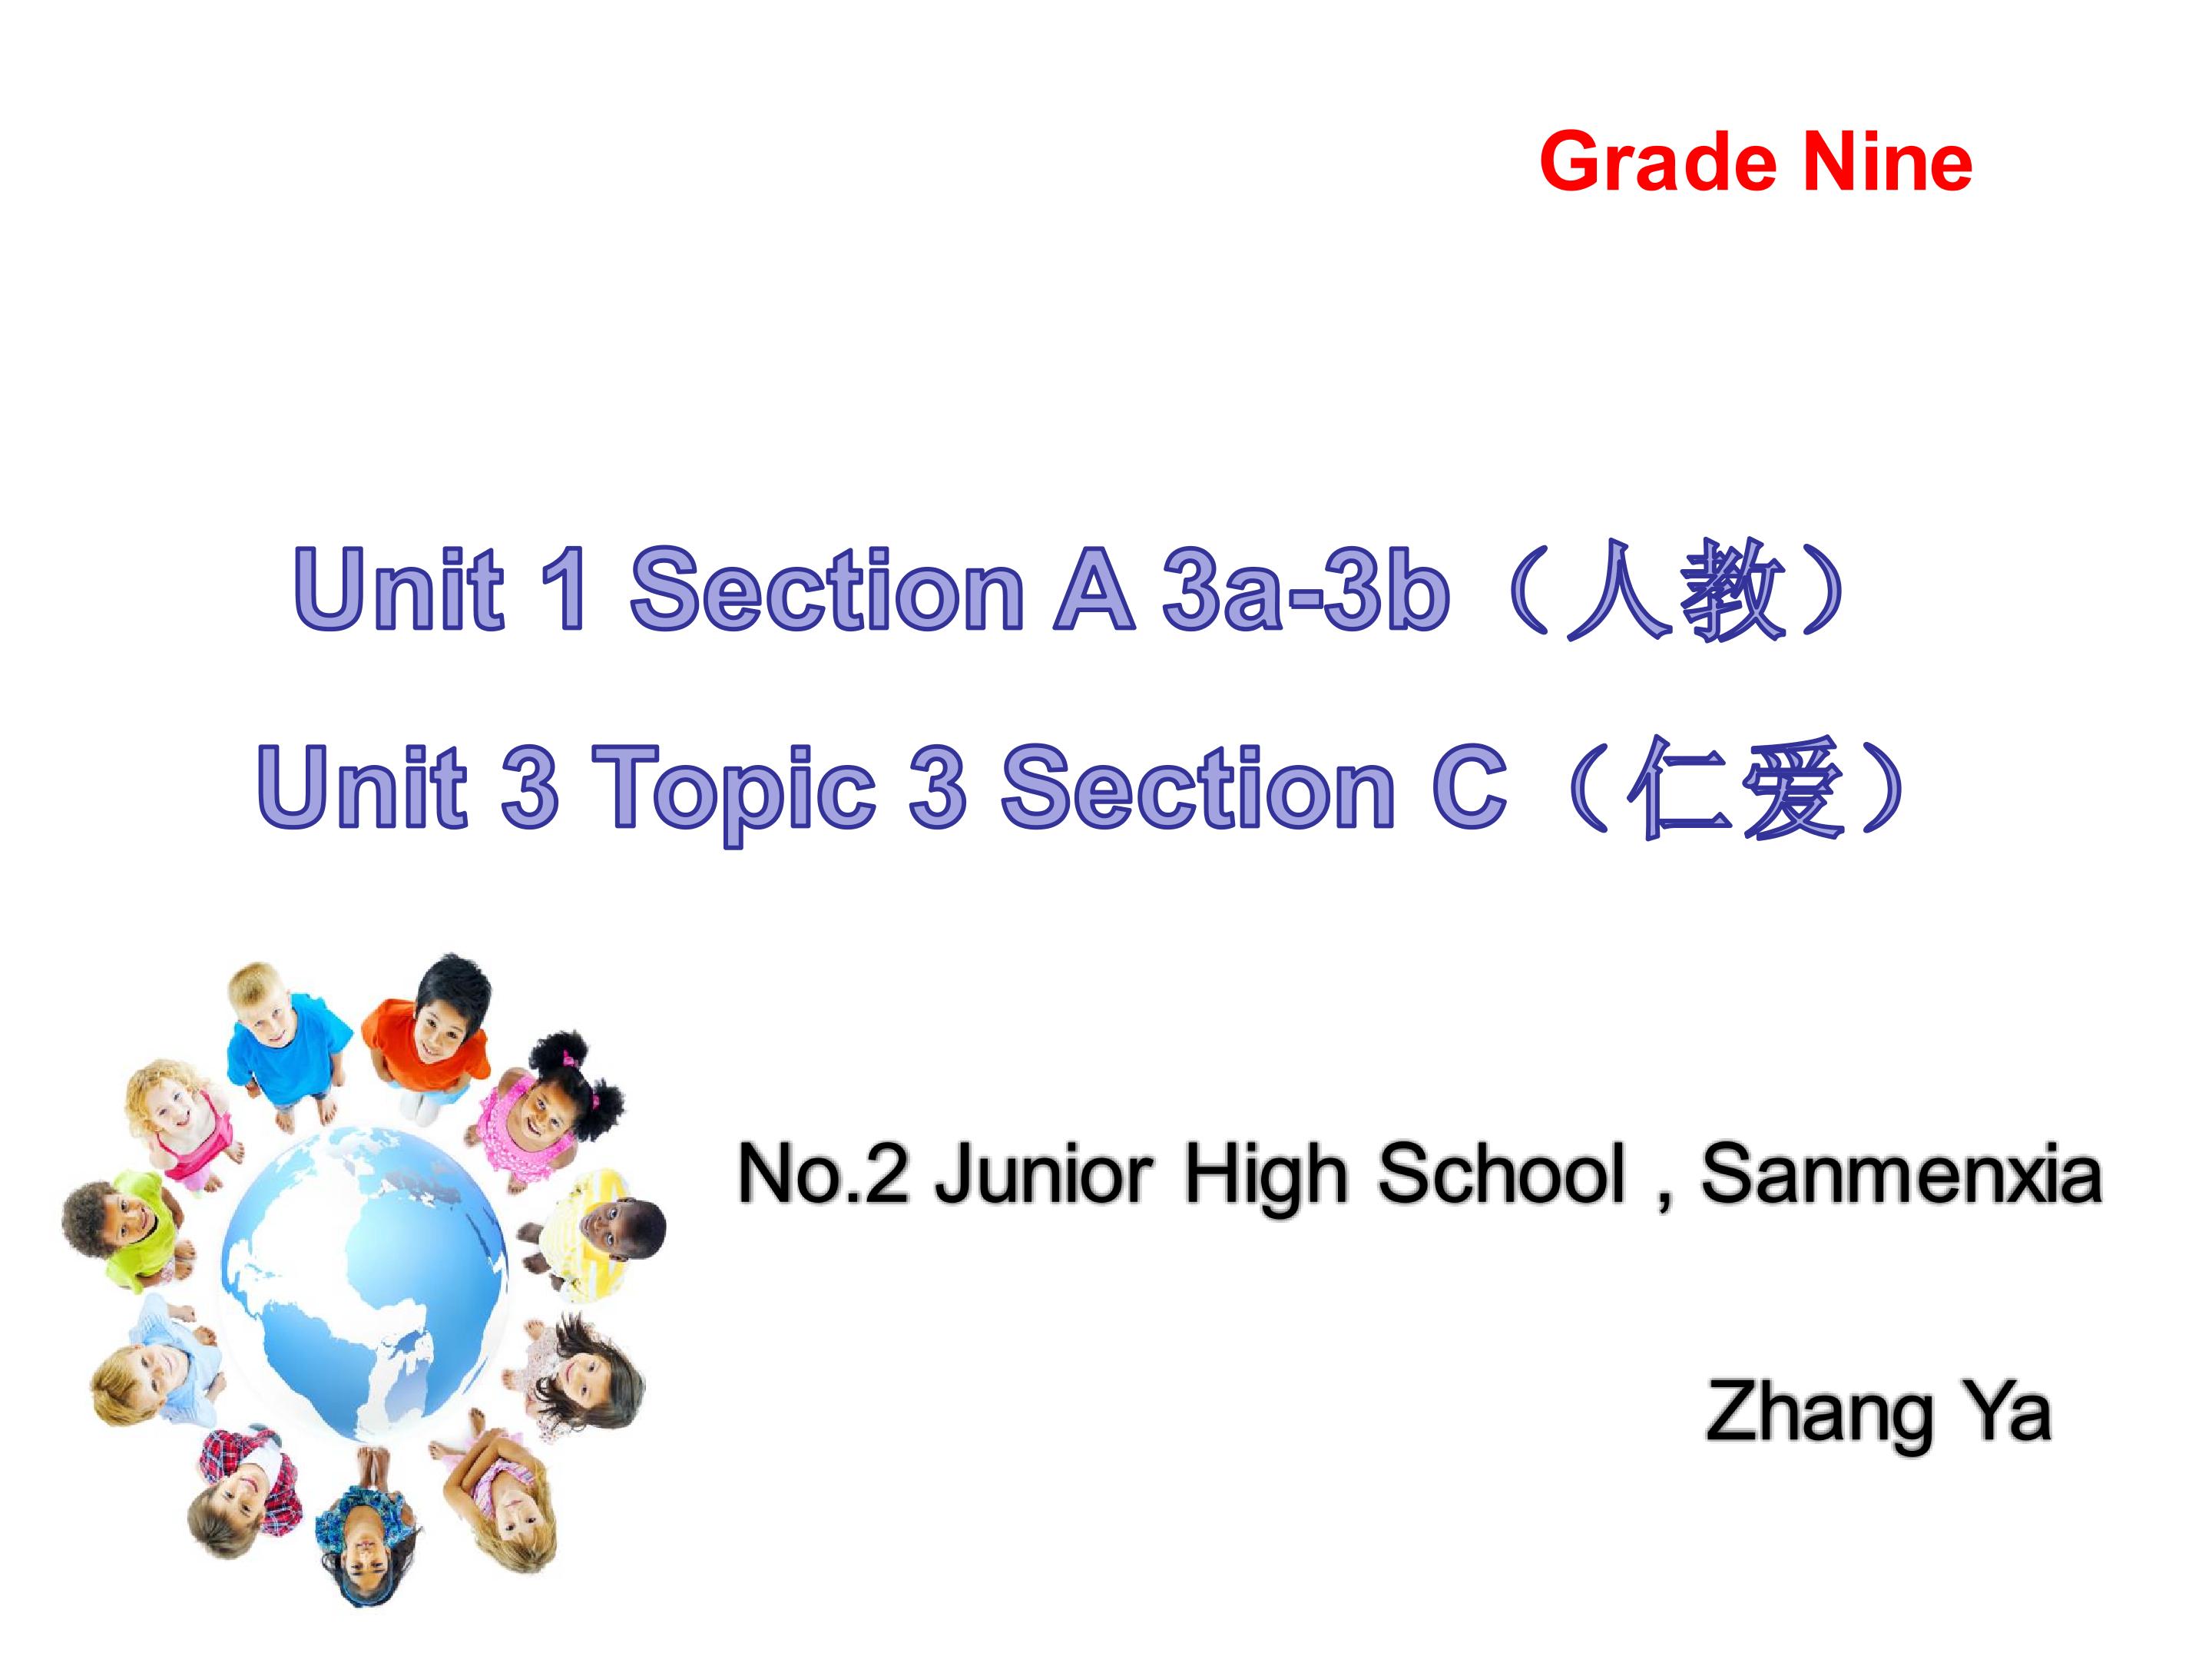 Unit 3 Topic 3 Section C